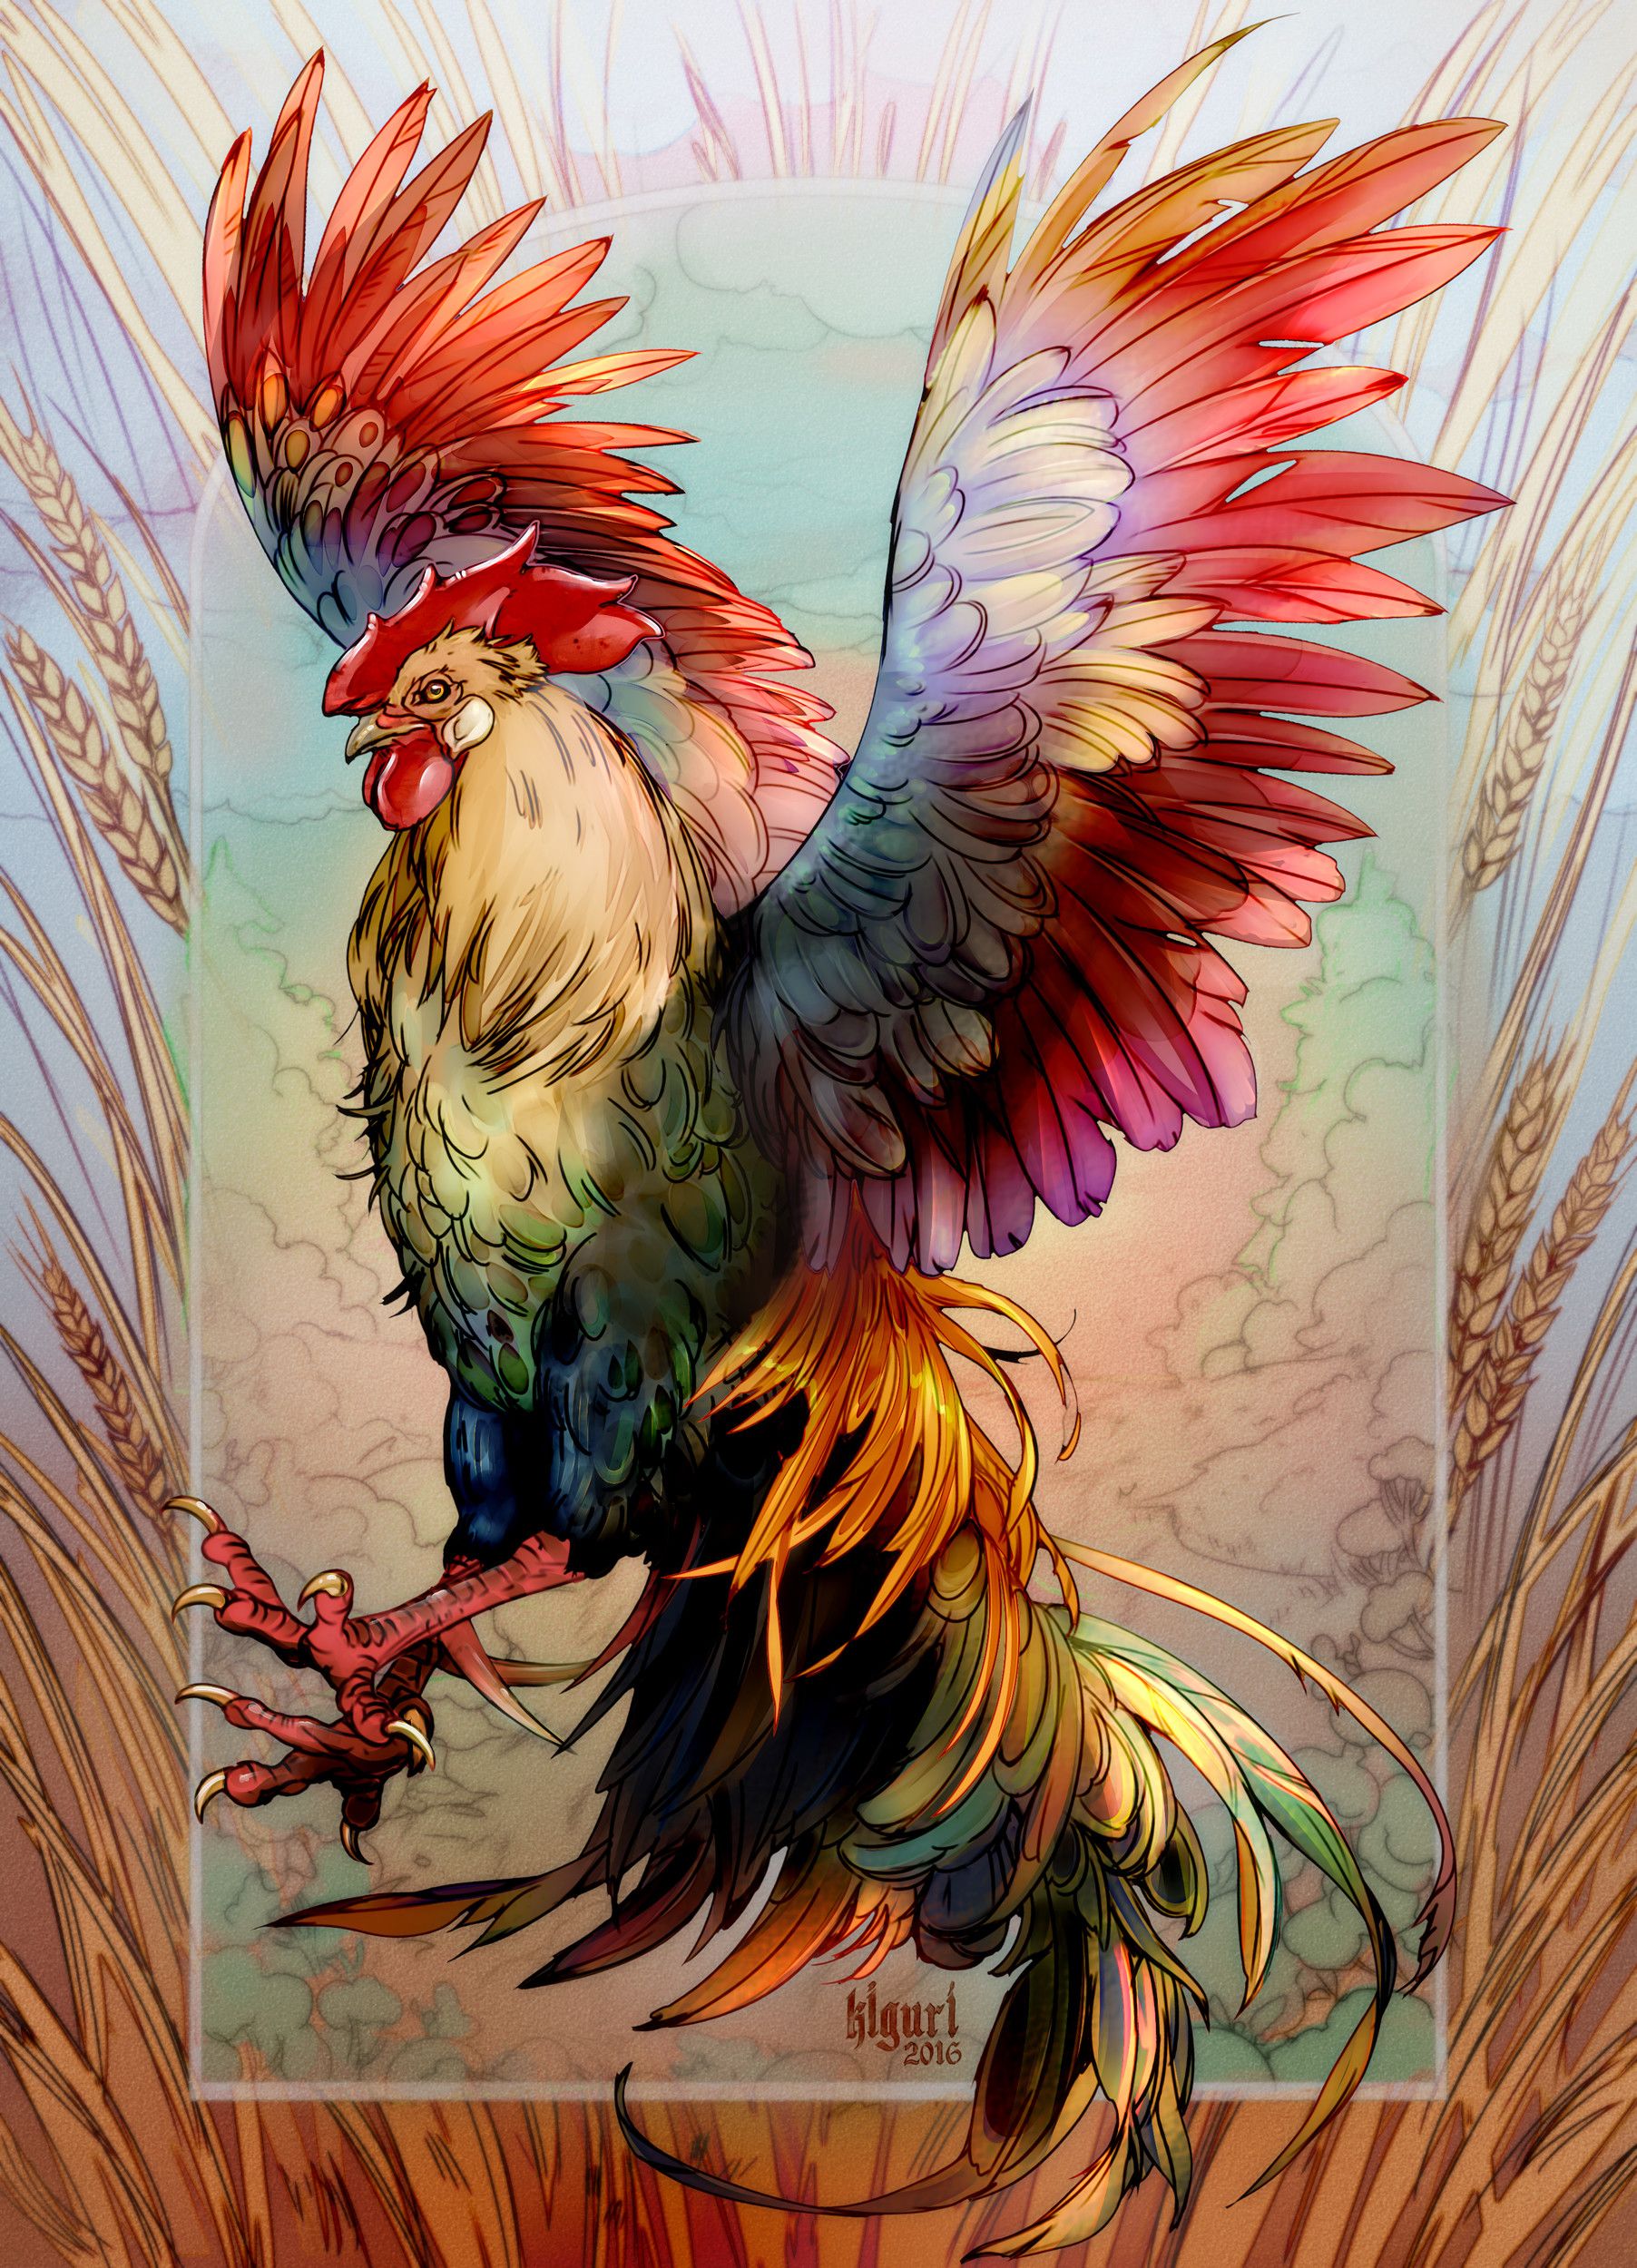 Year of the Rooster, Victoria Yurkovets HD Wallpaper